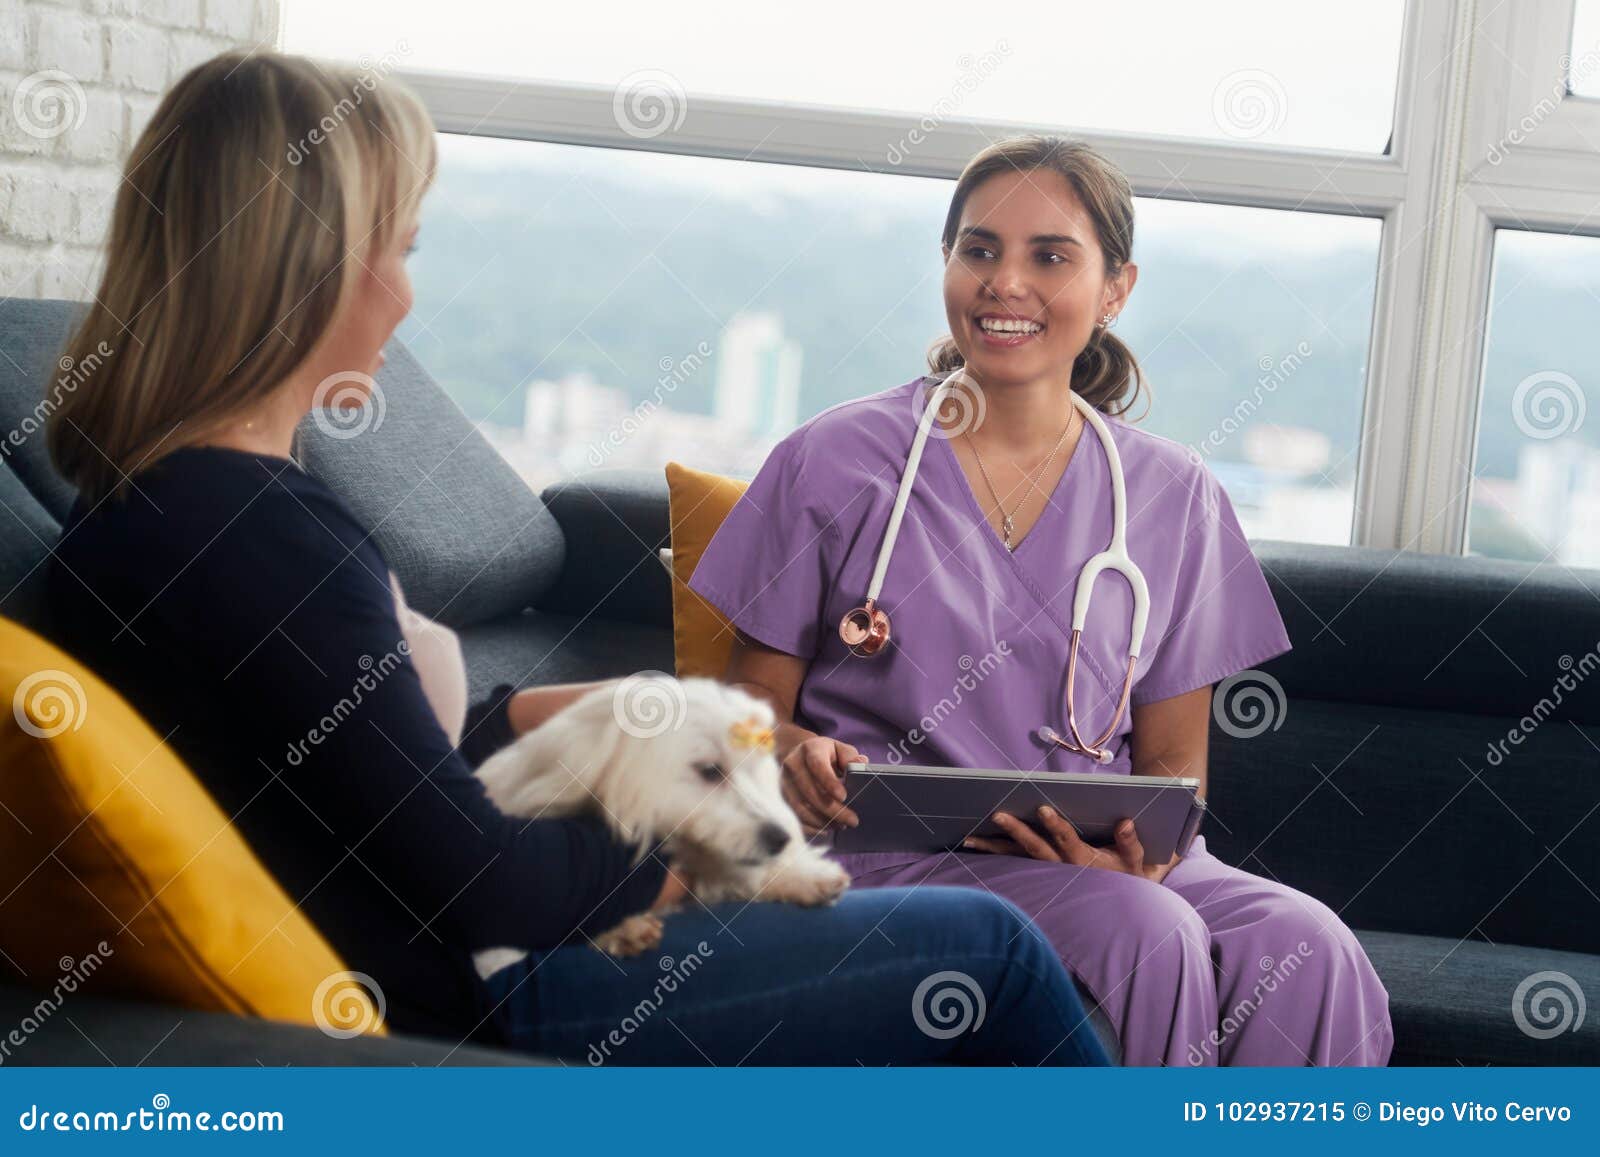 Dog Owner And Pet During Home Visit 